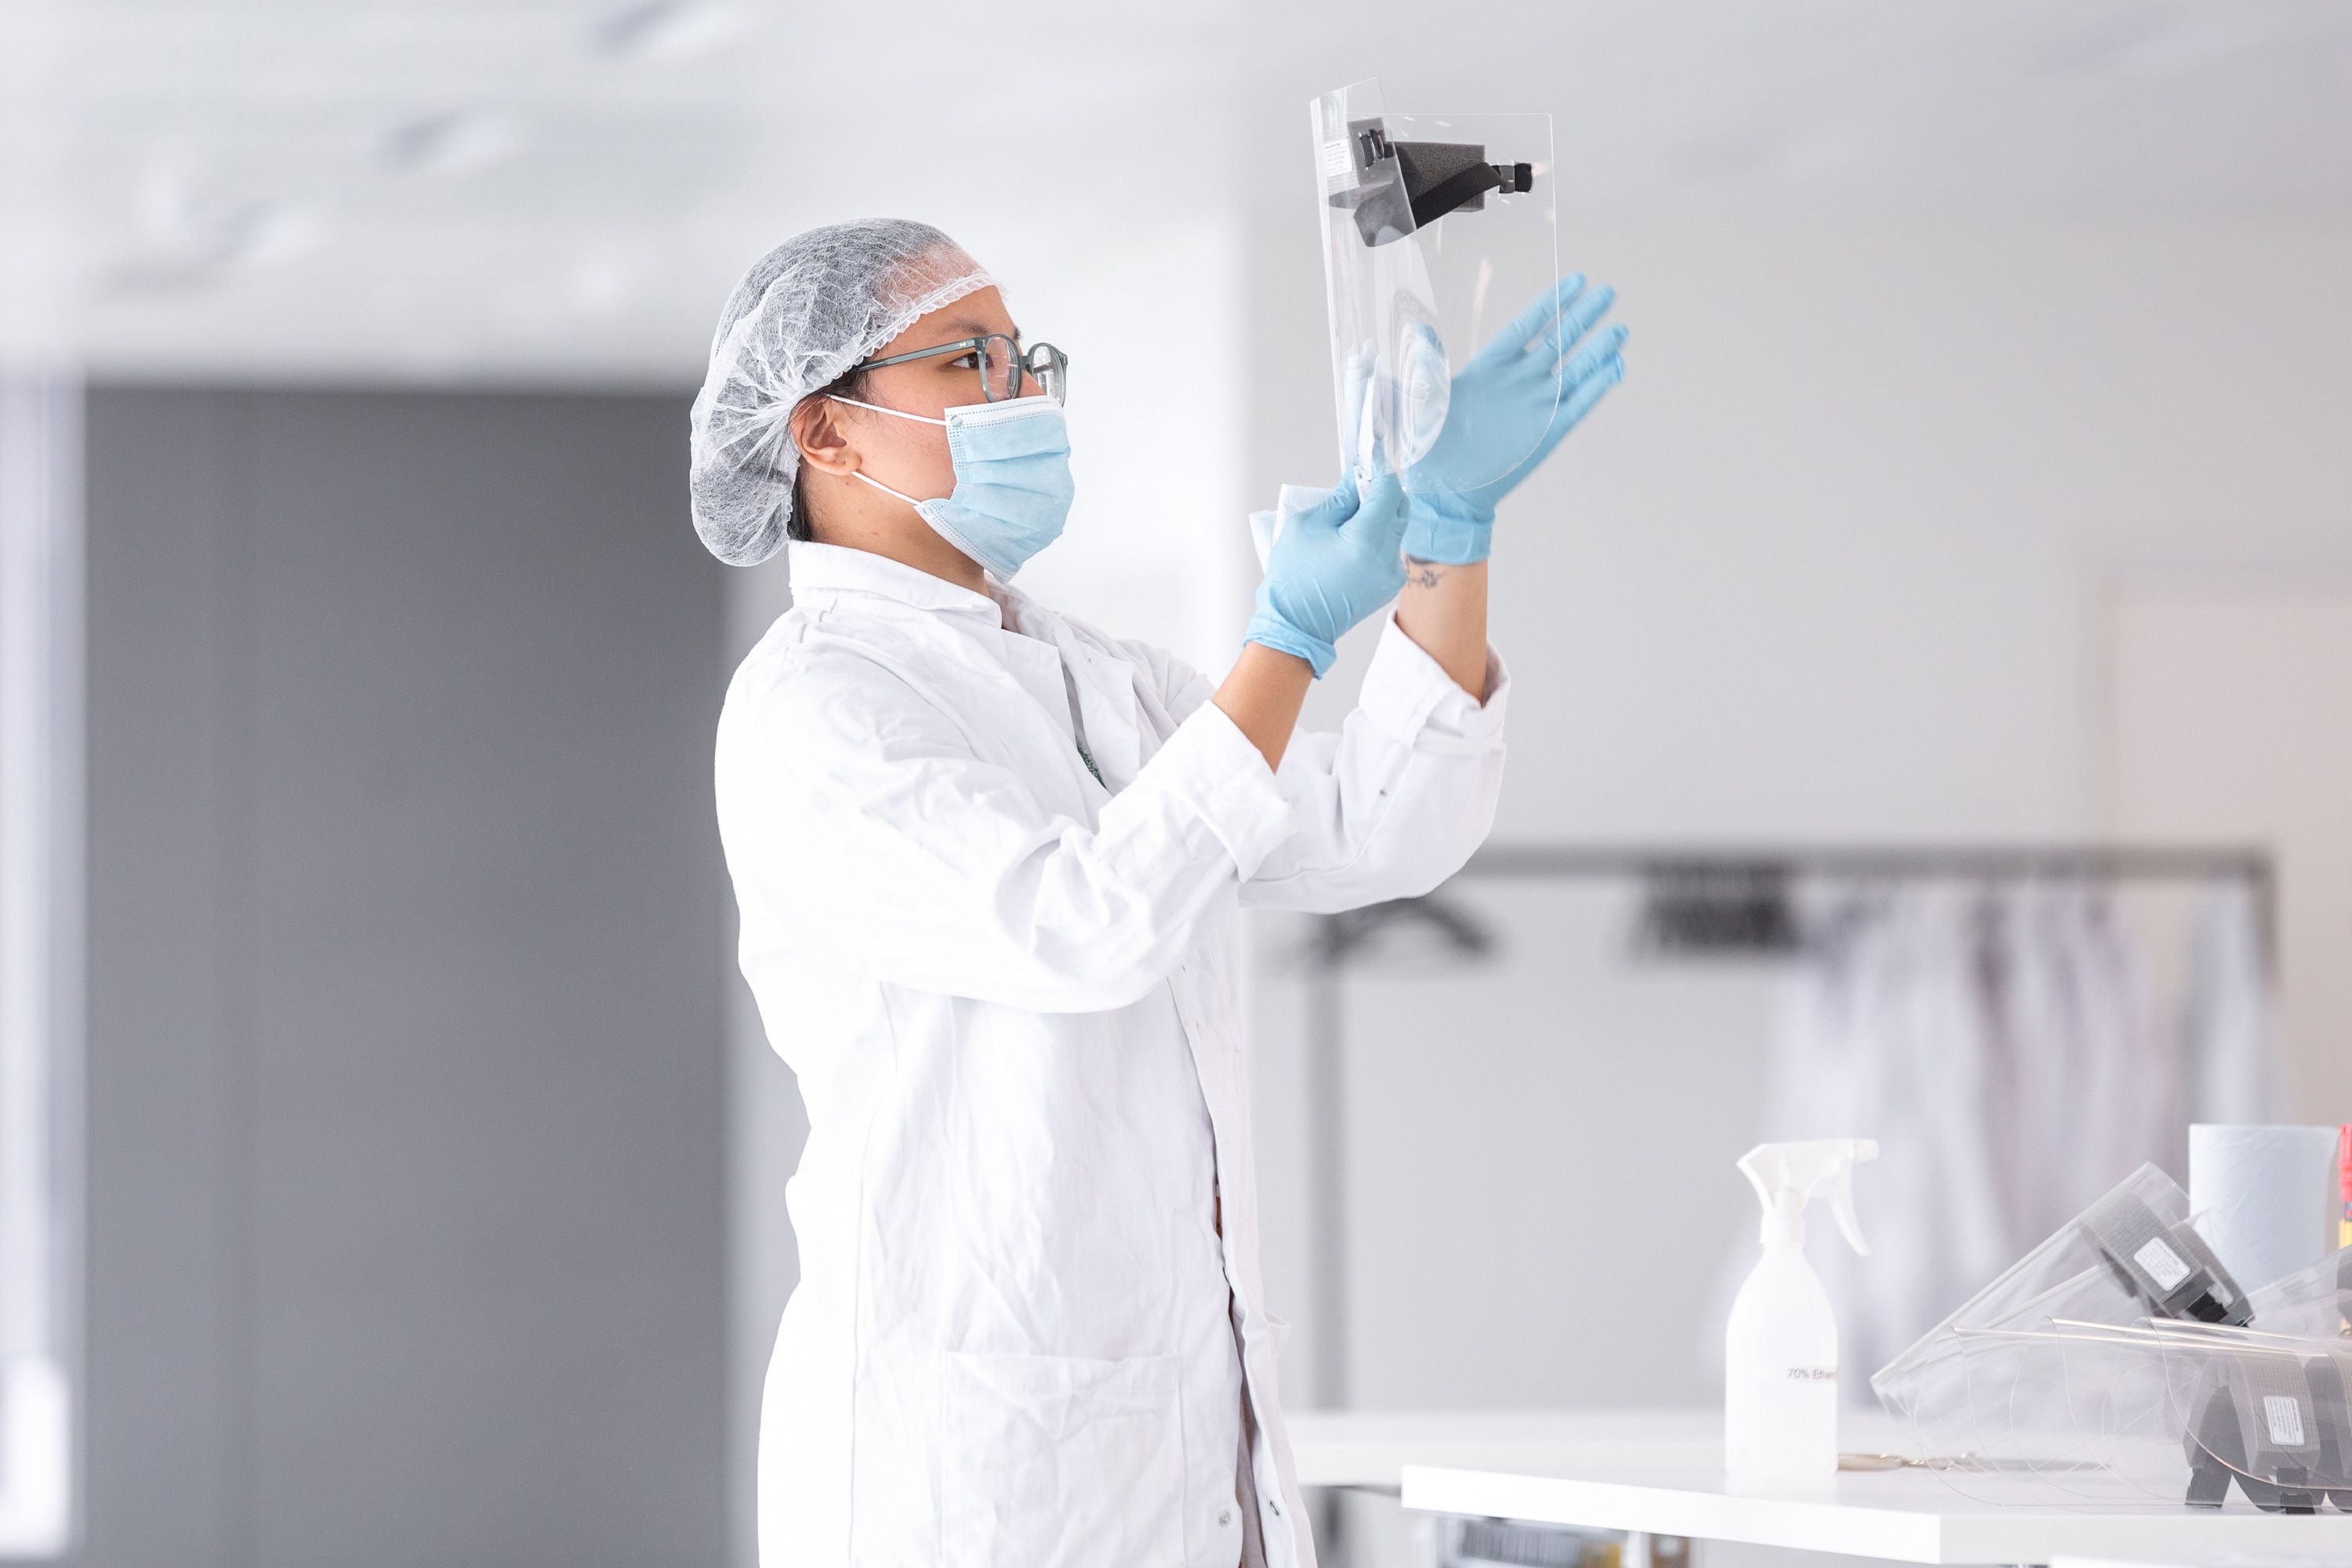 In a white room, a person in a white lab coat and hairnet examines a PPE facemask